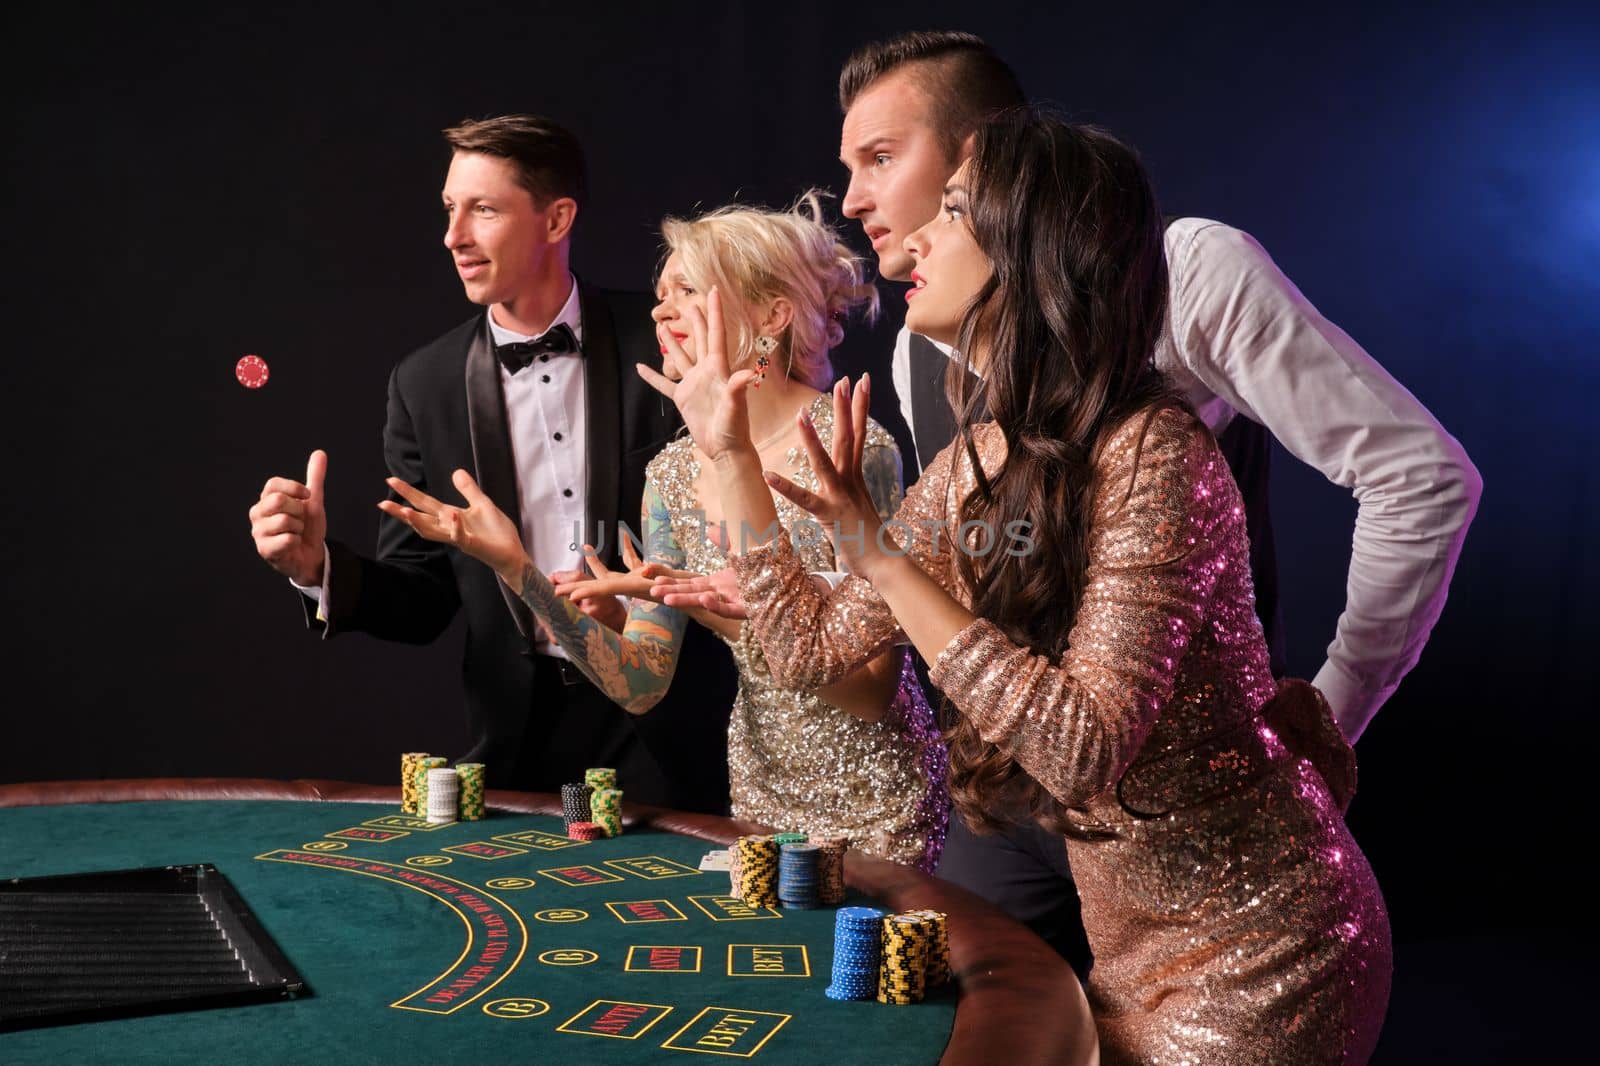 Side shot of a stylish rich friends playing poker at casino. Youth have lose. They are standing at the table against a red and blue backlights on black background. Risky gambling entertainment.